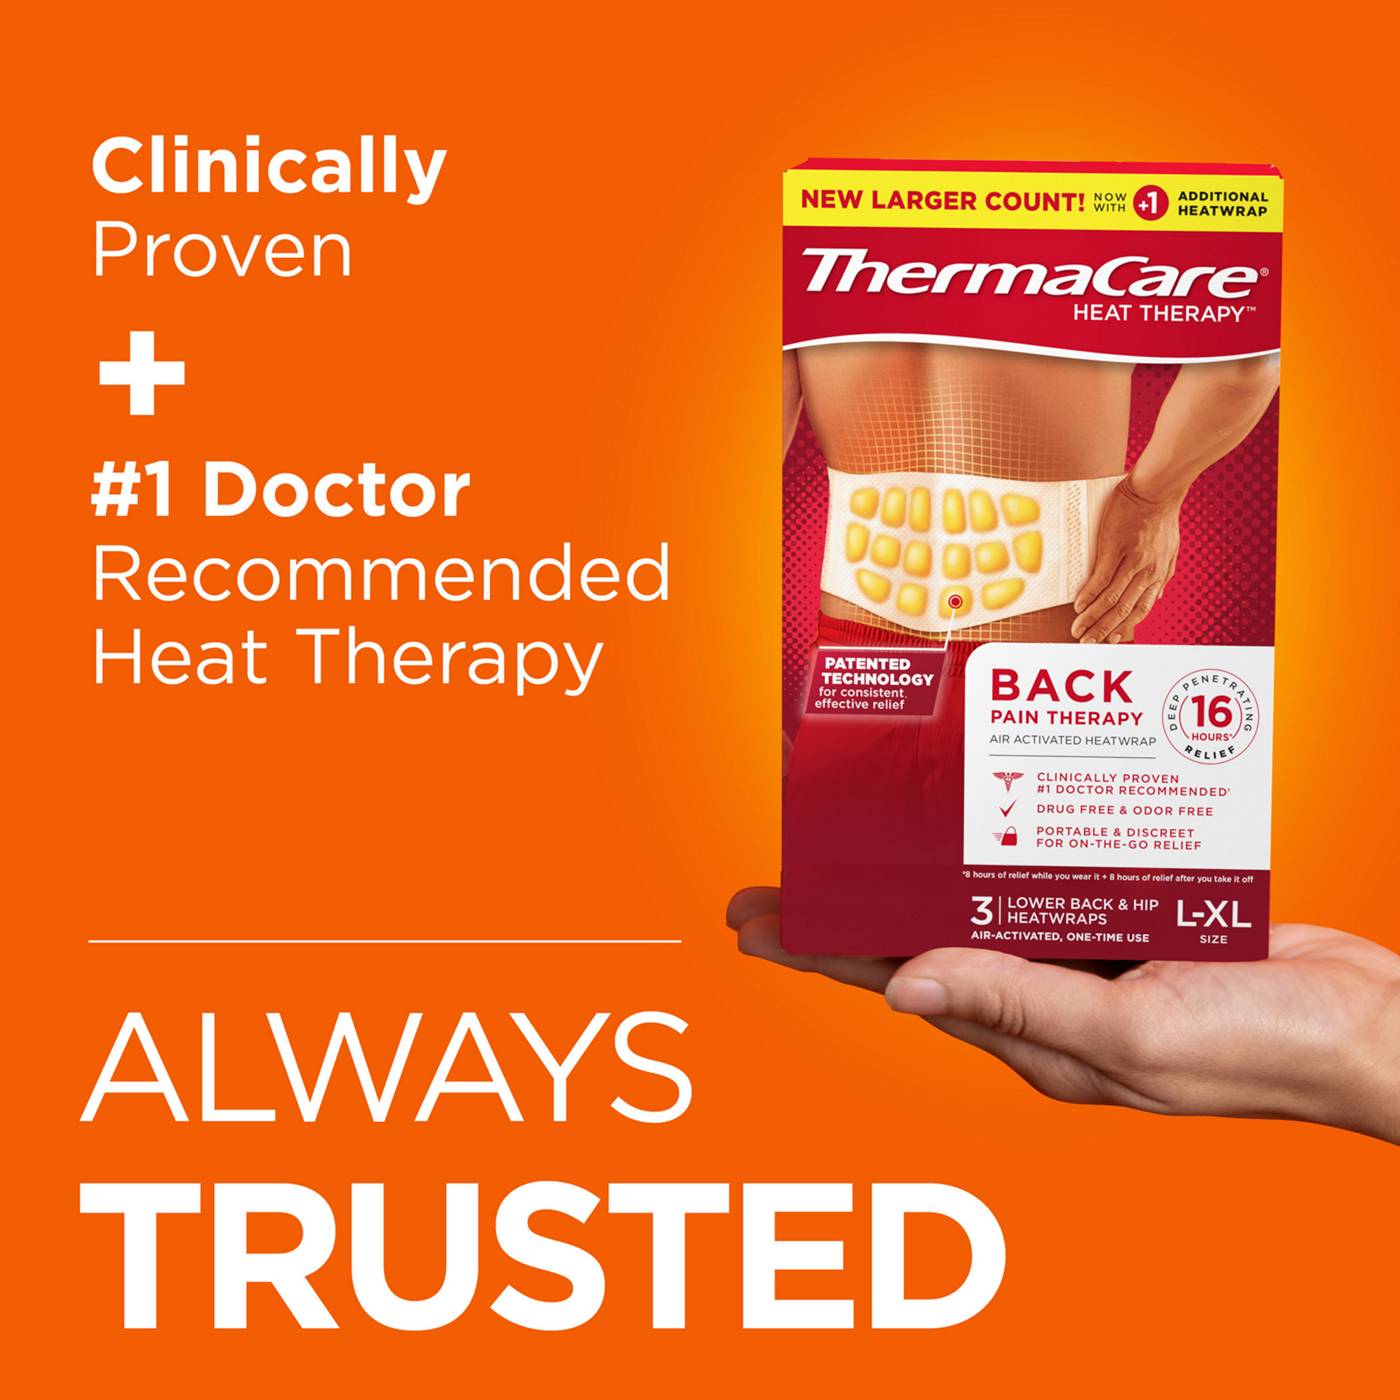 ThermaCare Back Pain Therapy Heatwraps; image 9 of 9